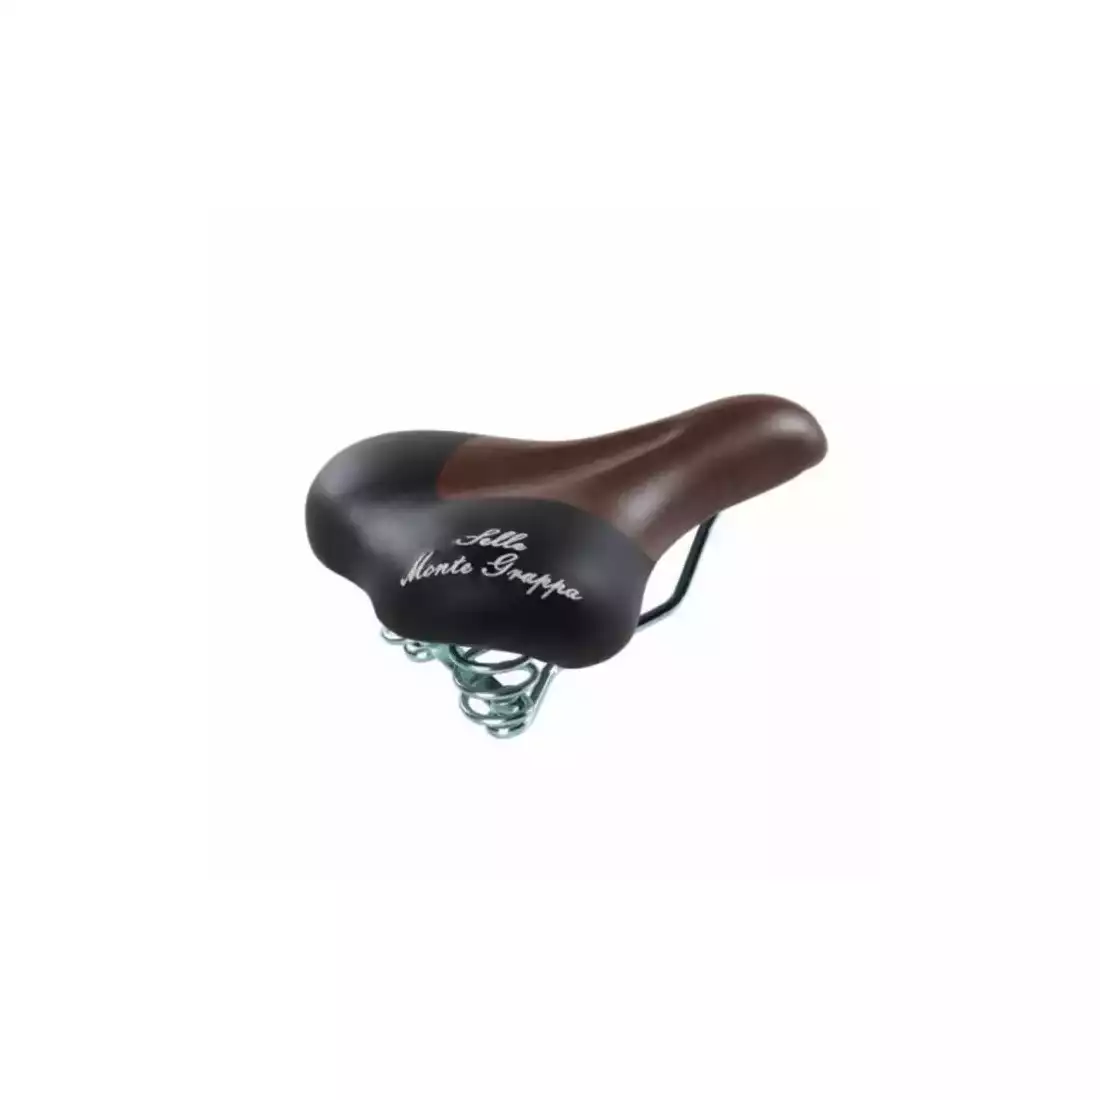 SELLE MONTE GRAPPA SCANSANO bicycle seat, black and brown